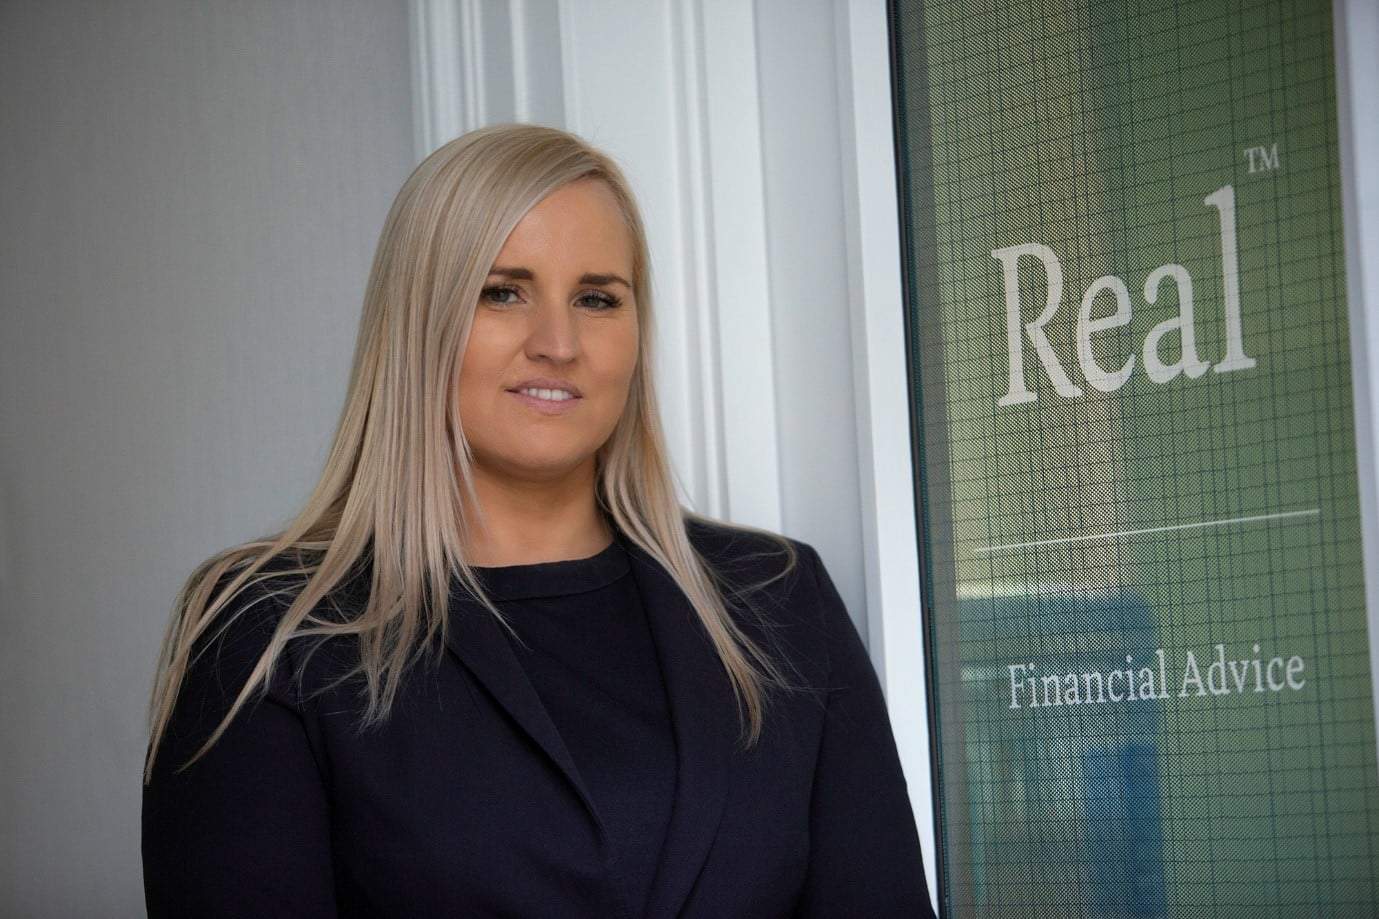 Cath Humphreys: Profile of the Director of Real Financial Advice